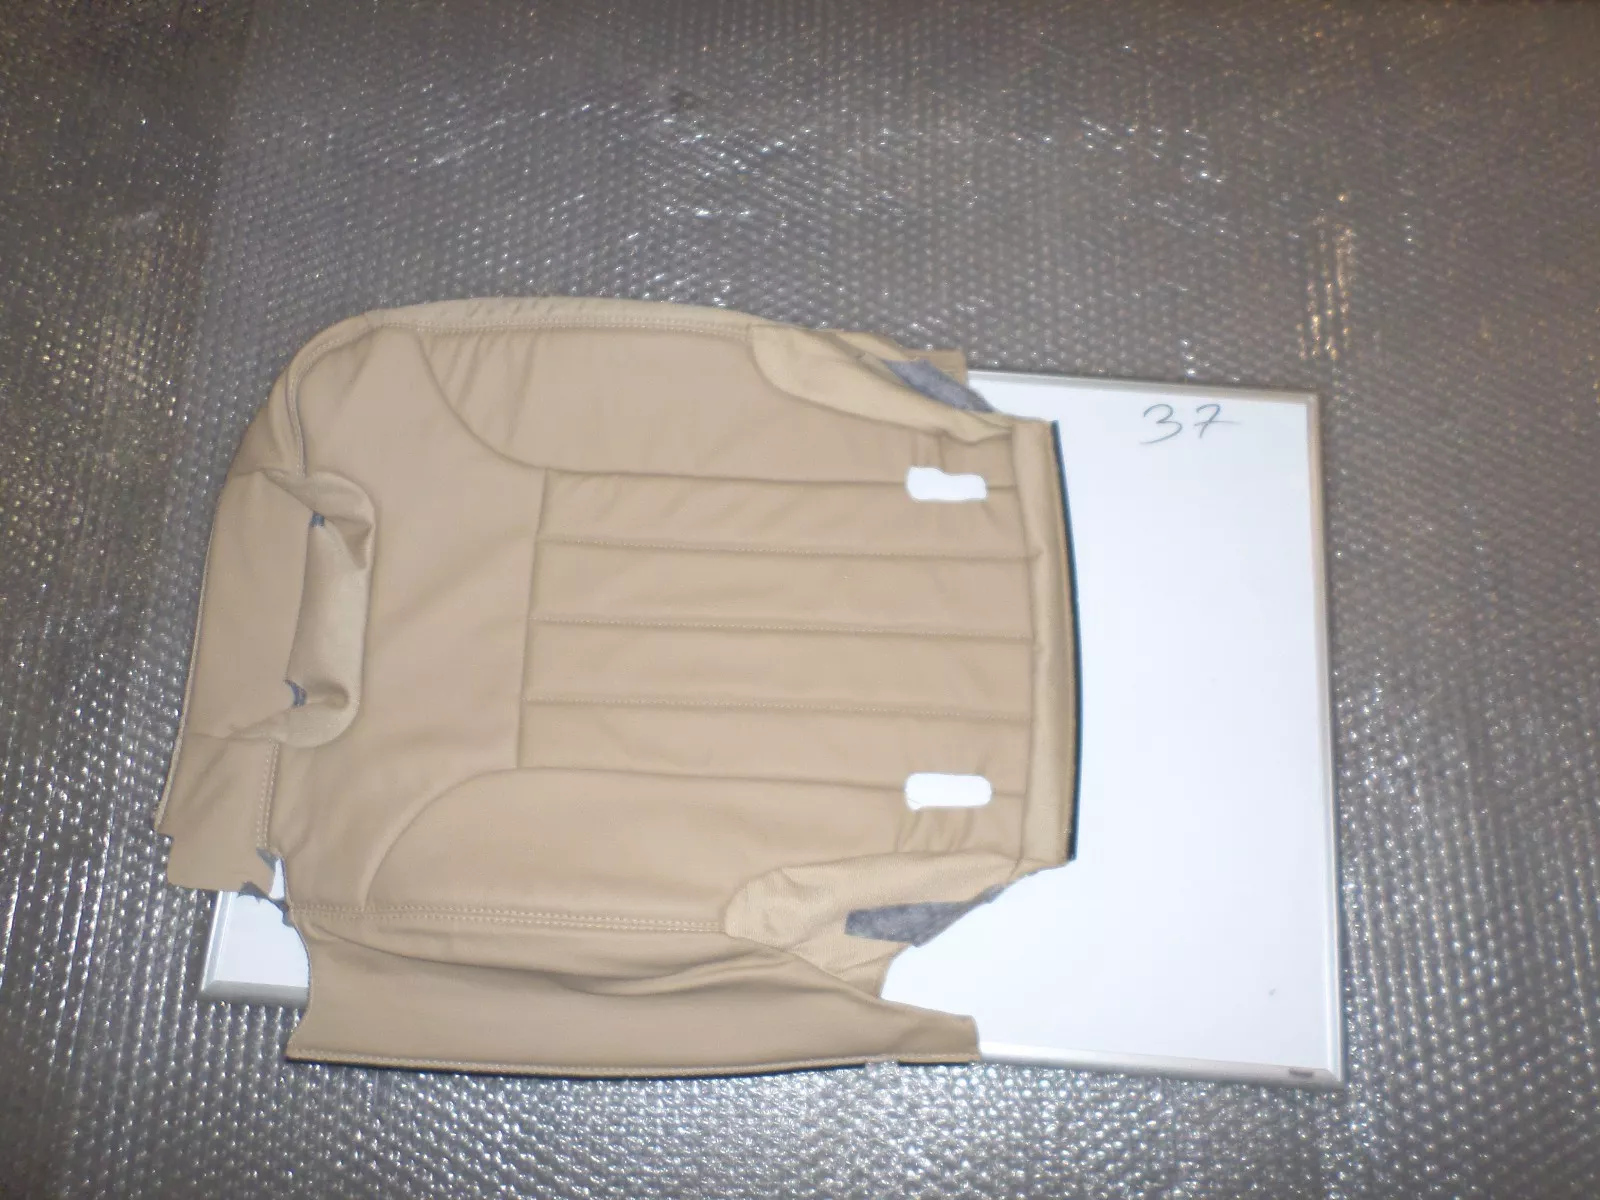 New OEM Mercedes 3rd Row LH Seat Cover 2006-2013 R-Class 251-930-08-87-8K55 - £77.53 GBP